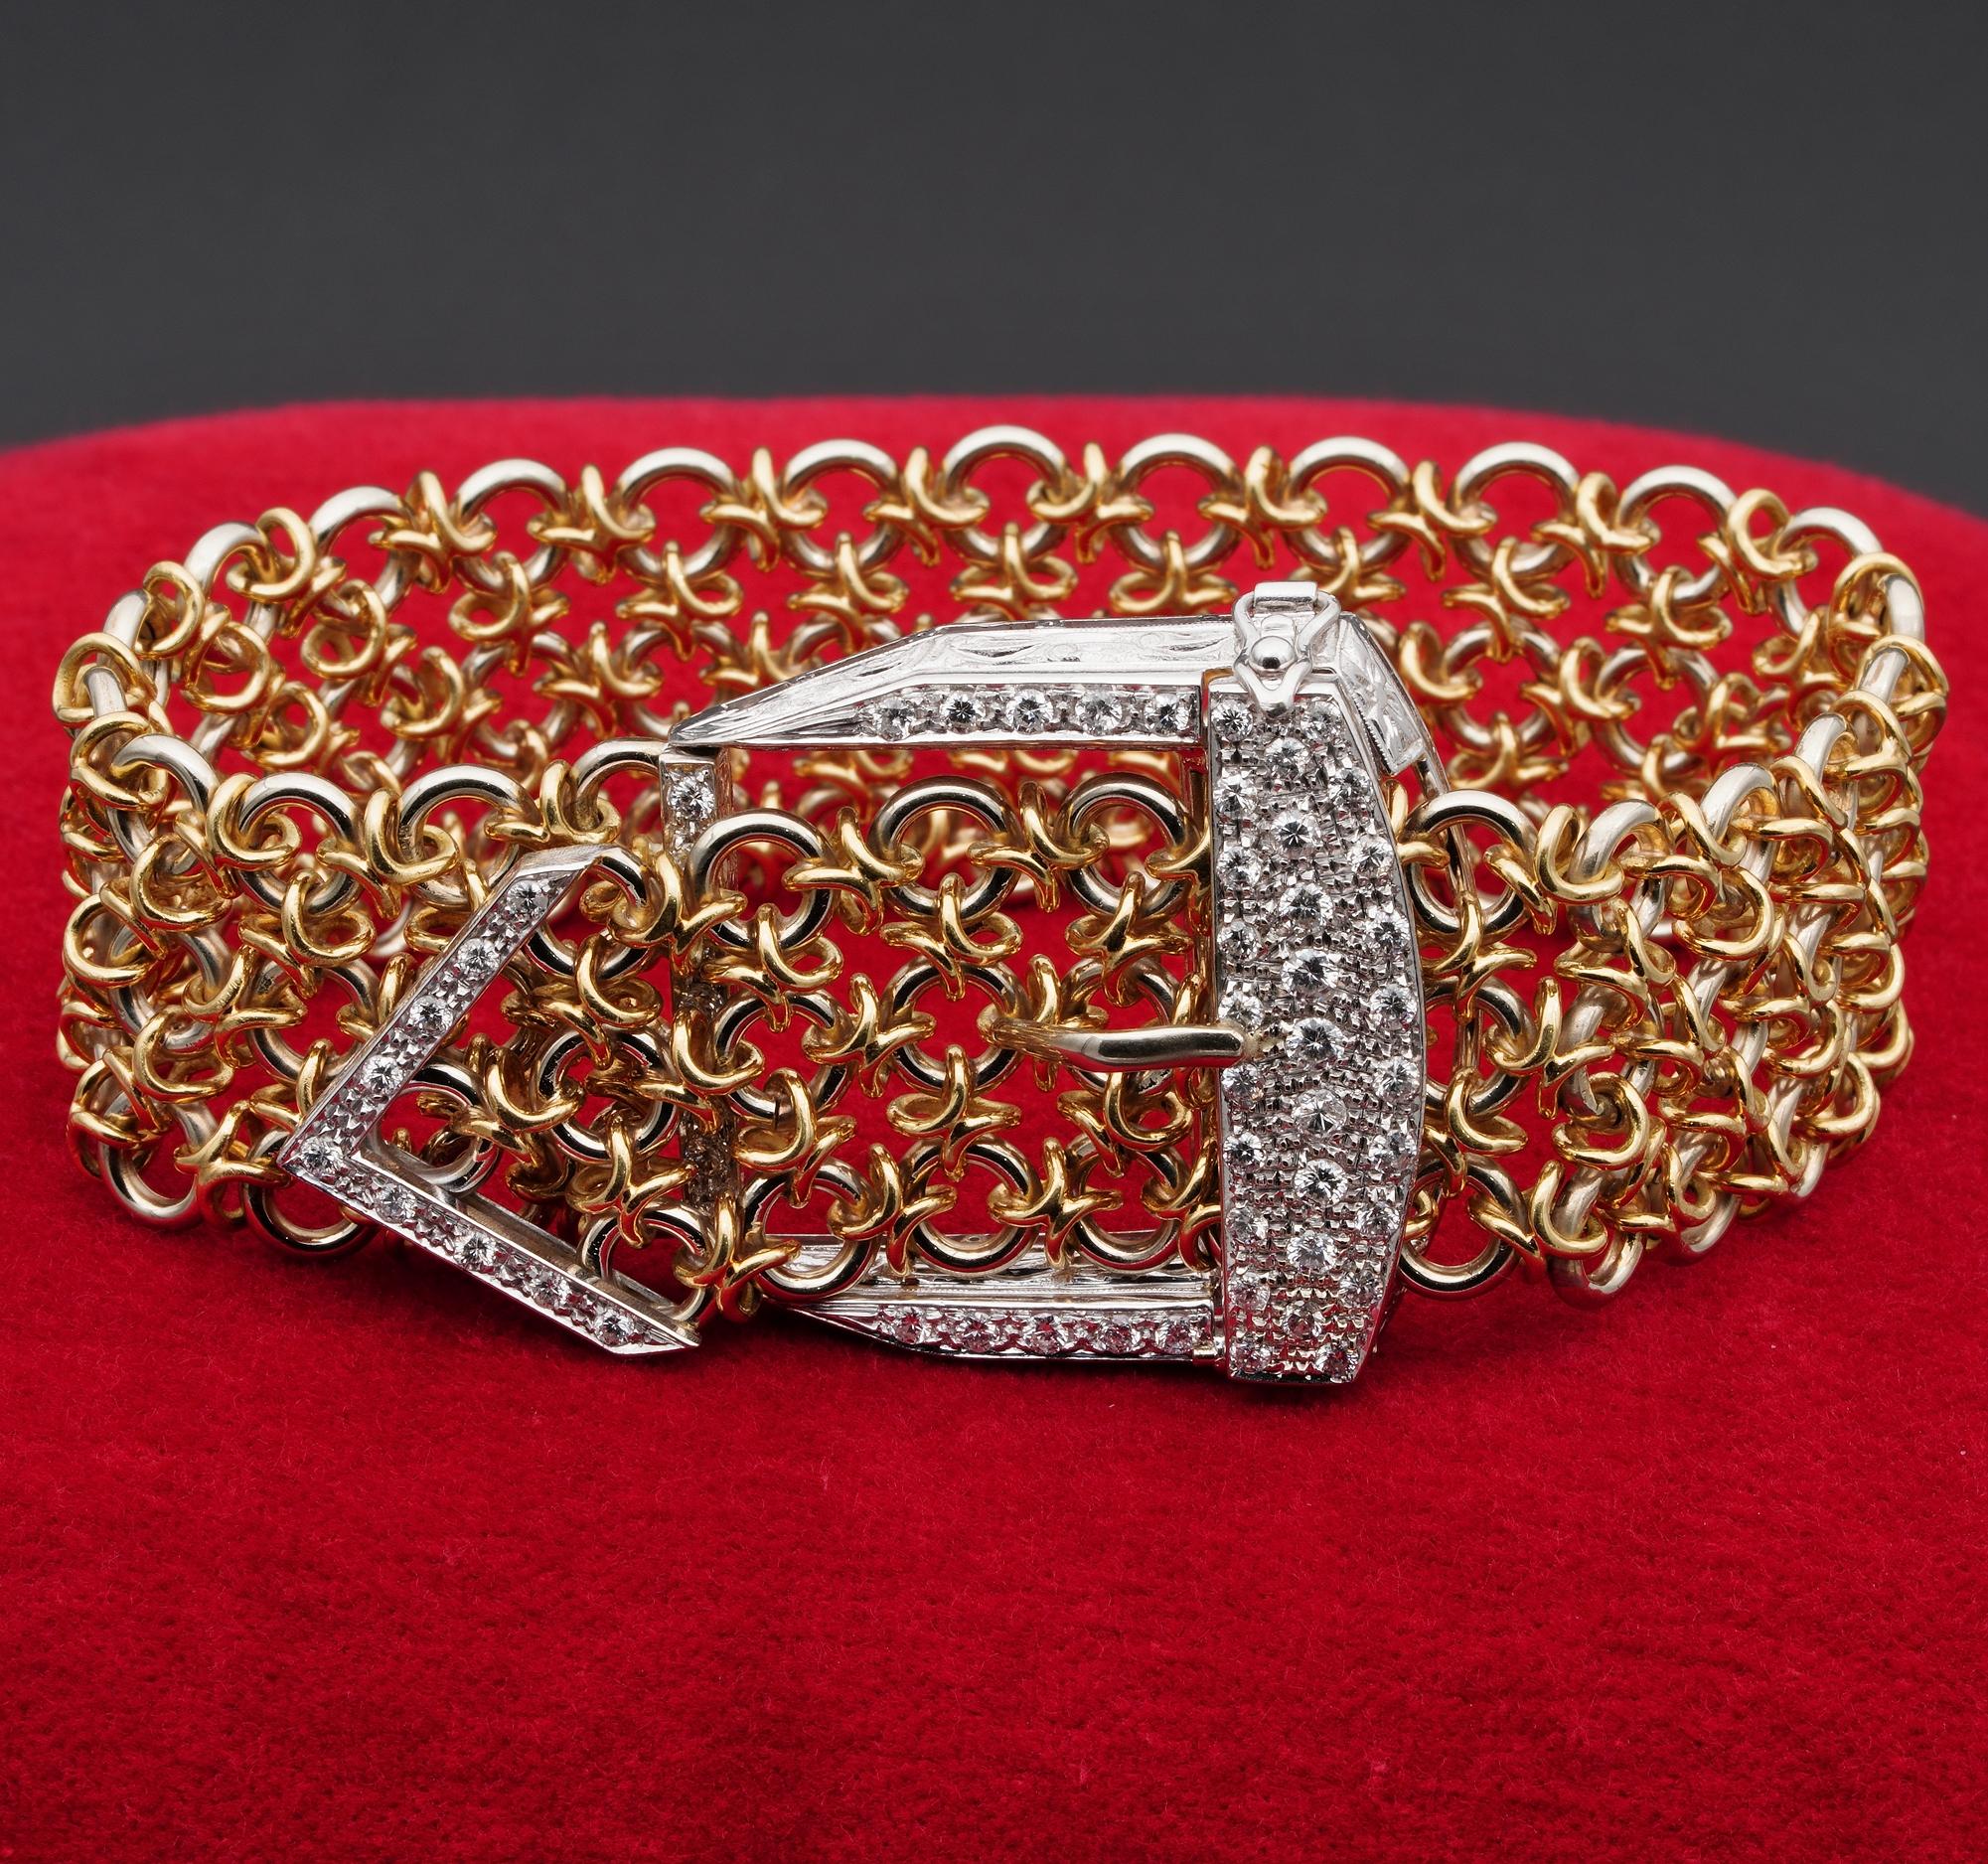 Jewelled wrists!

Gold softness, buckled with Diamonds! Hand wrought gold texture never seen before 1940 – bold, dressy, statements bracelet expression of the change of styles after the war restrictions
Joyful and wearable as statement, retro